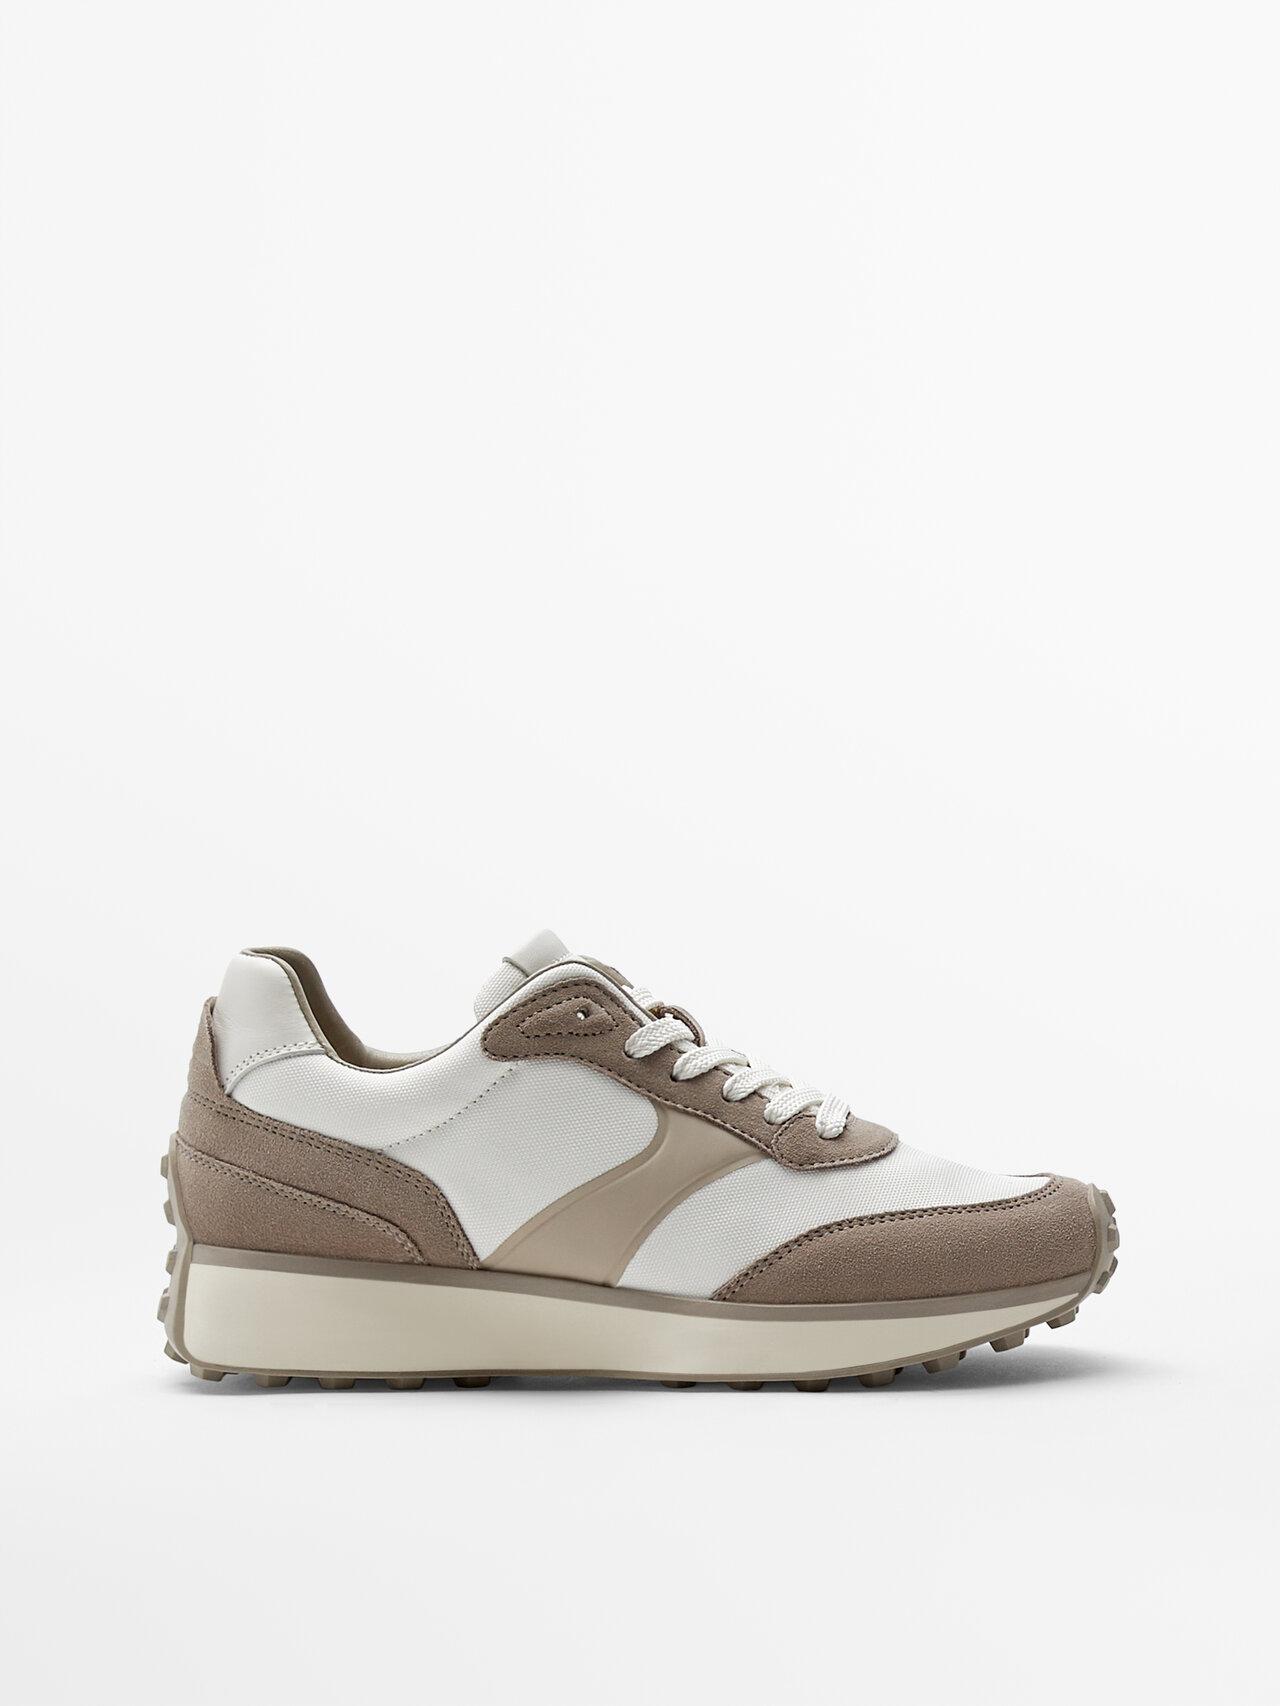 MASSIMO DUTTI Leather Trainers With Contrast Trims in White | Lyst